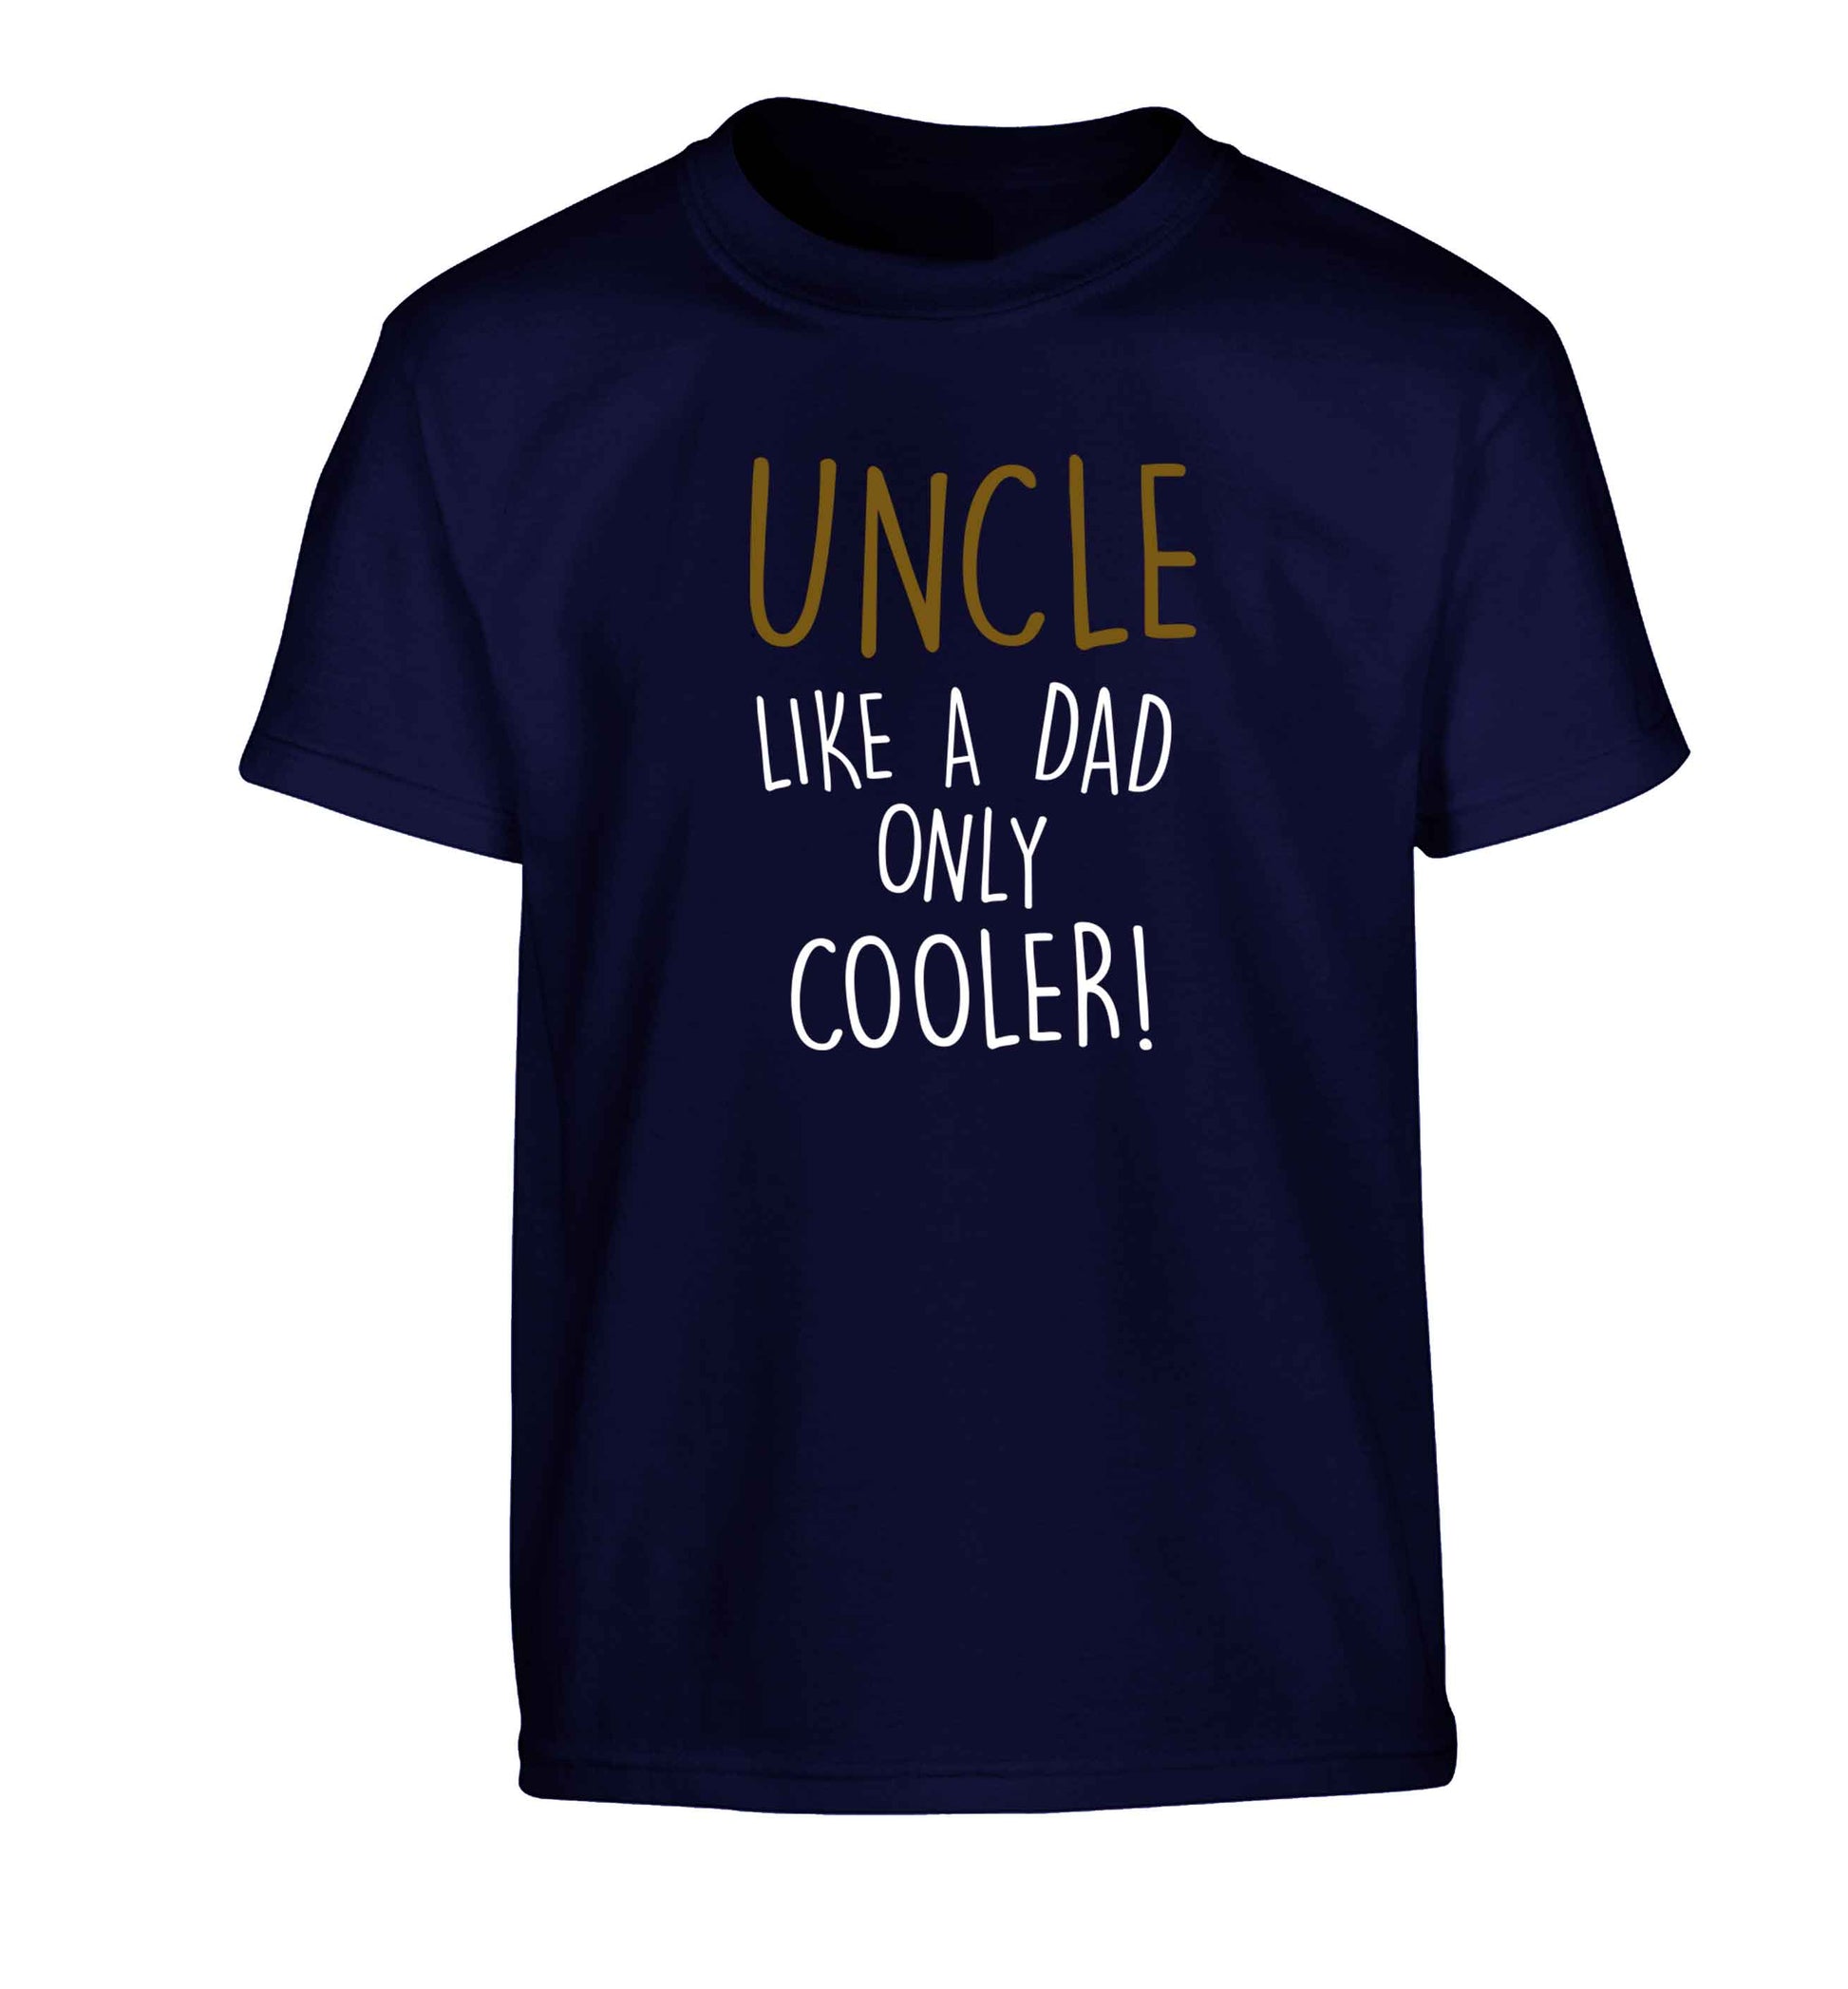 Uncle like a dad only cooler Children's navy Tshirt 12-13 Years